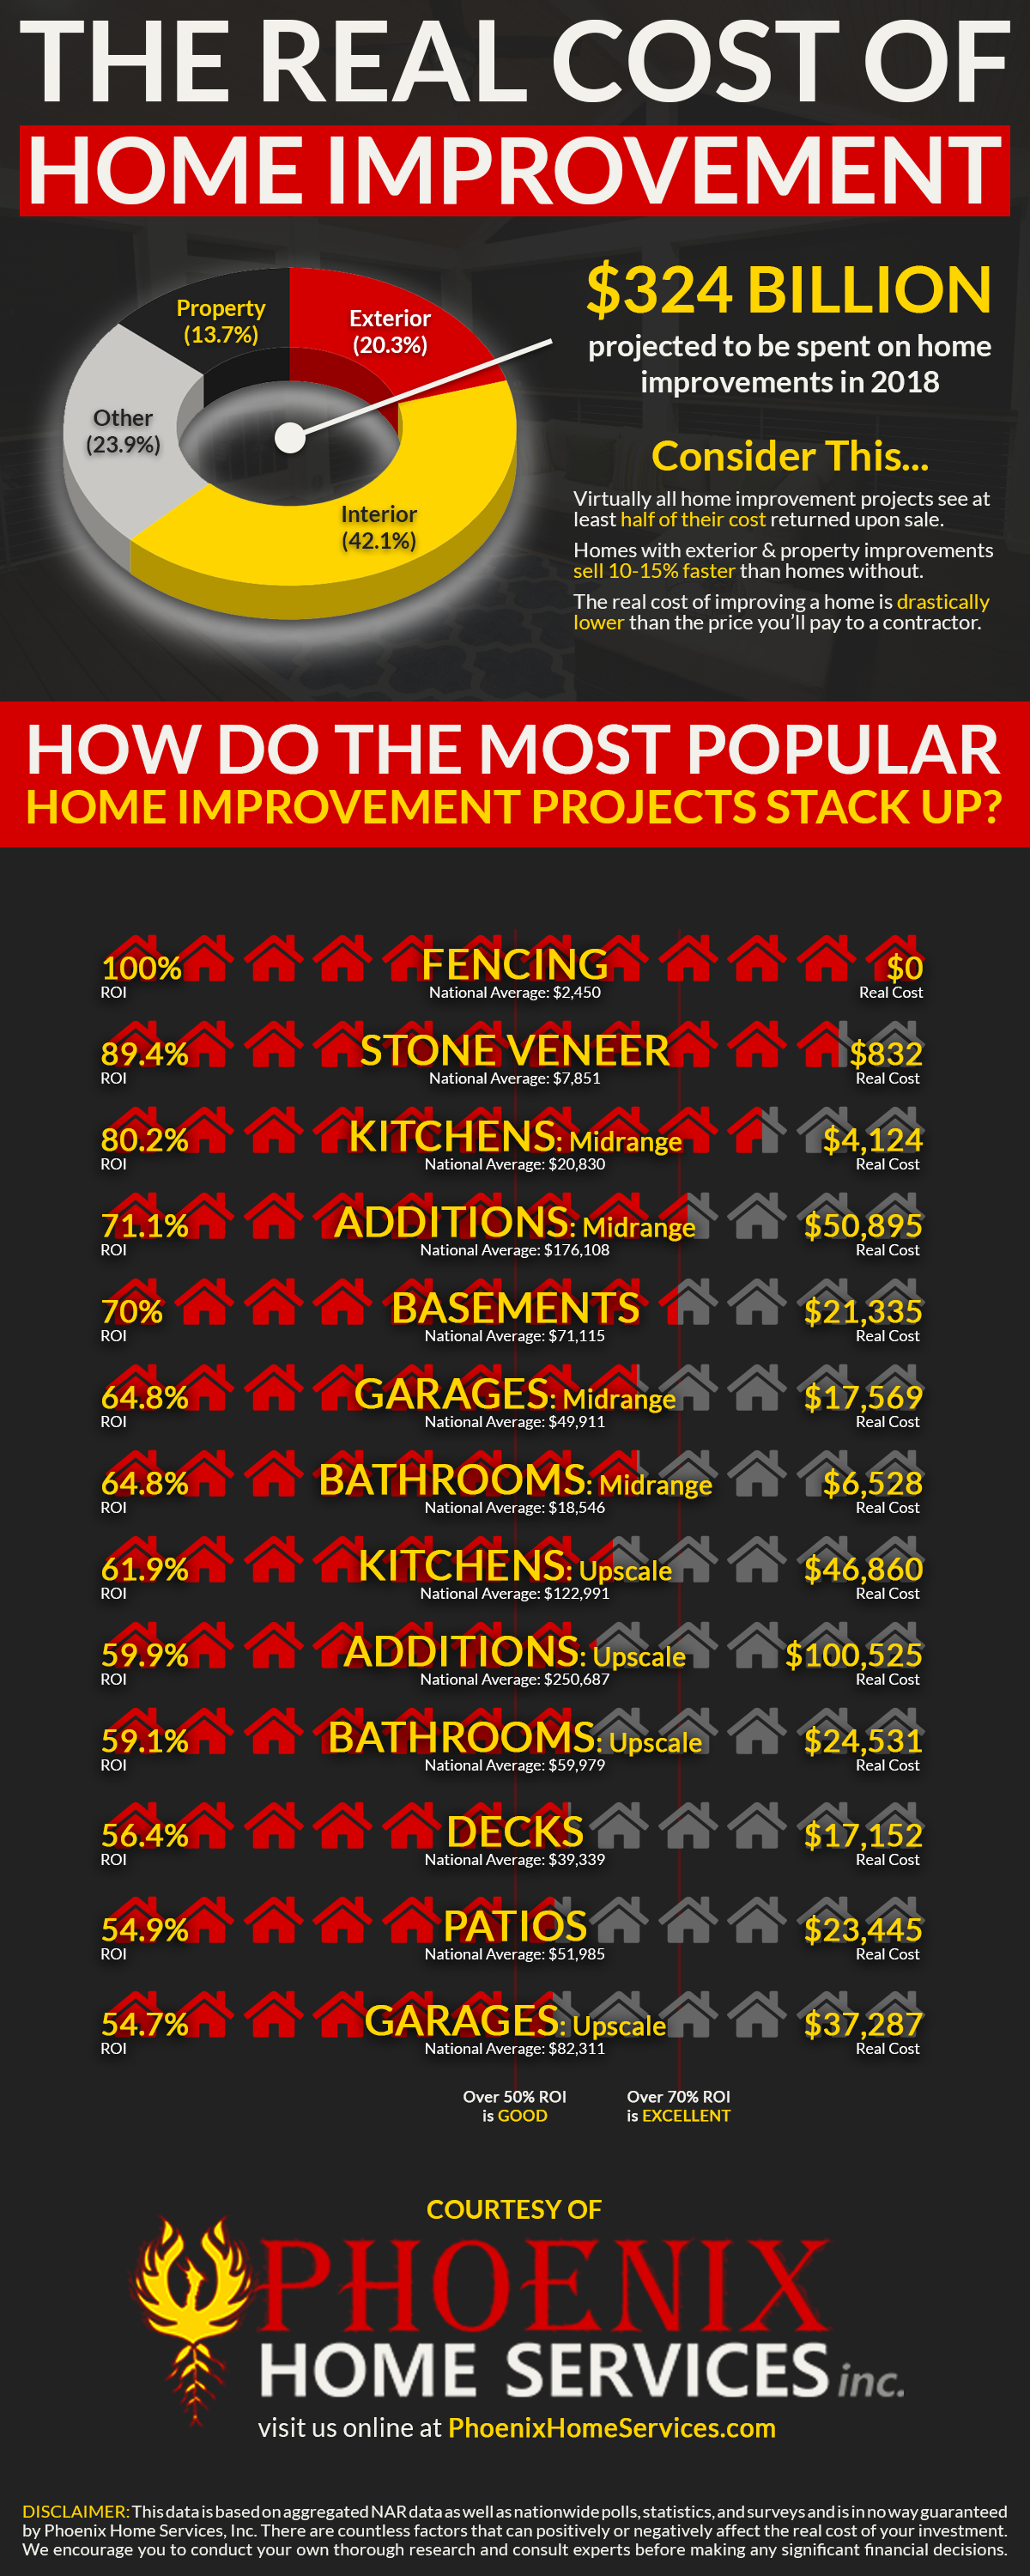 The Real Cost of Home Improvement